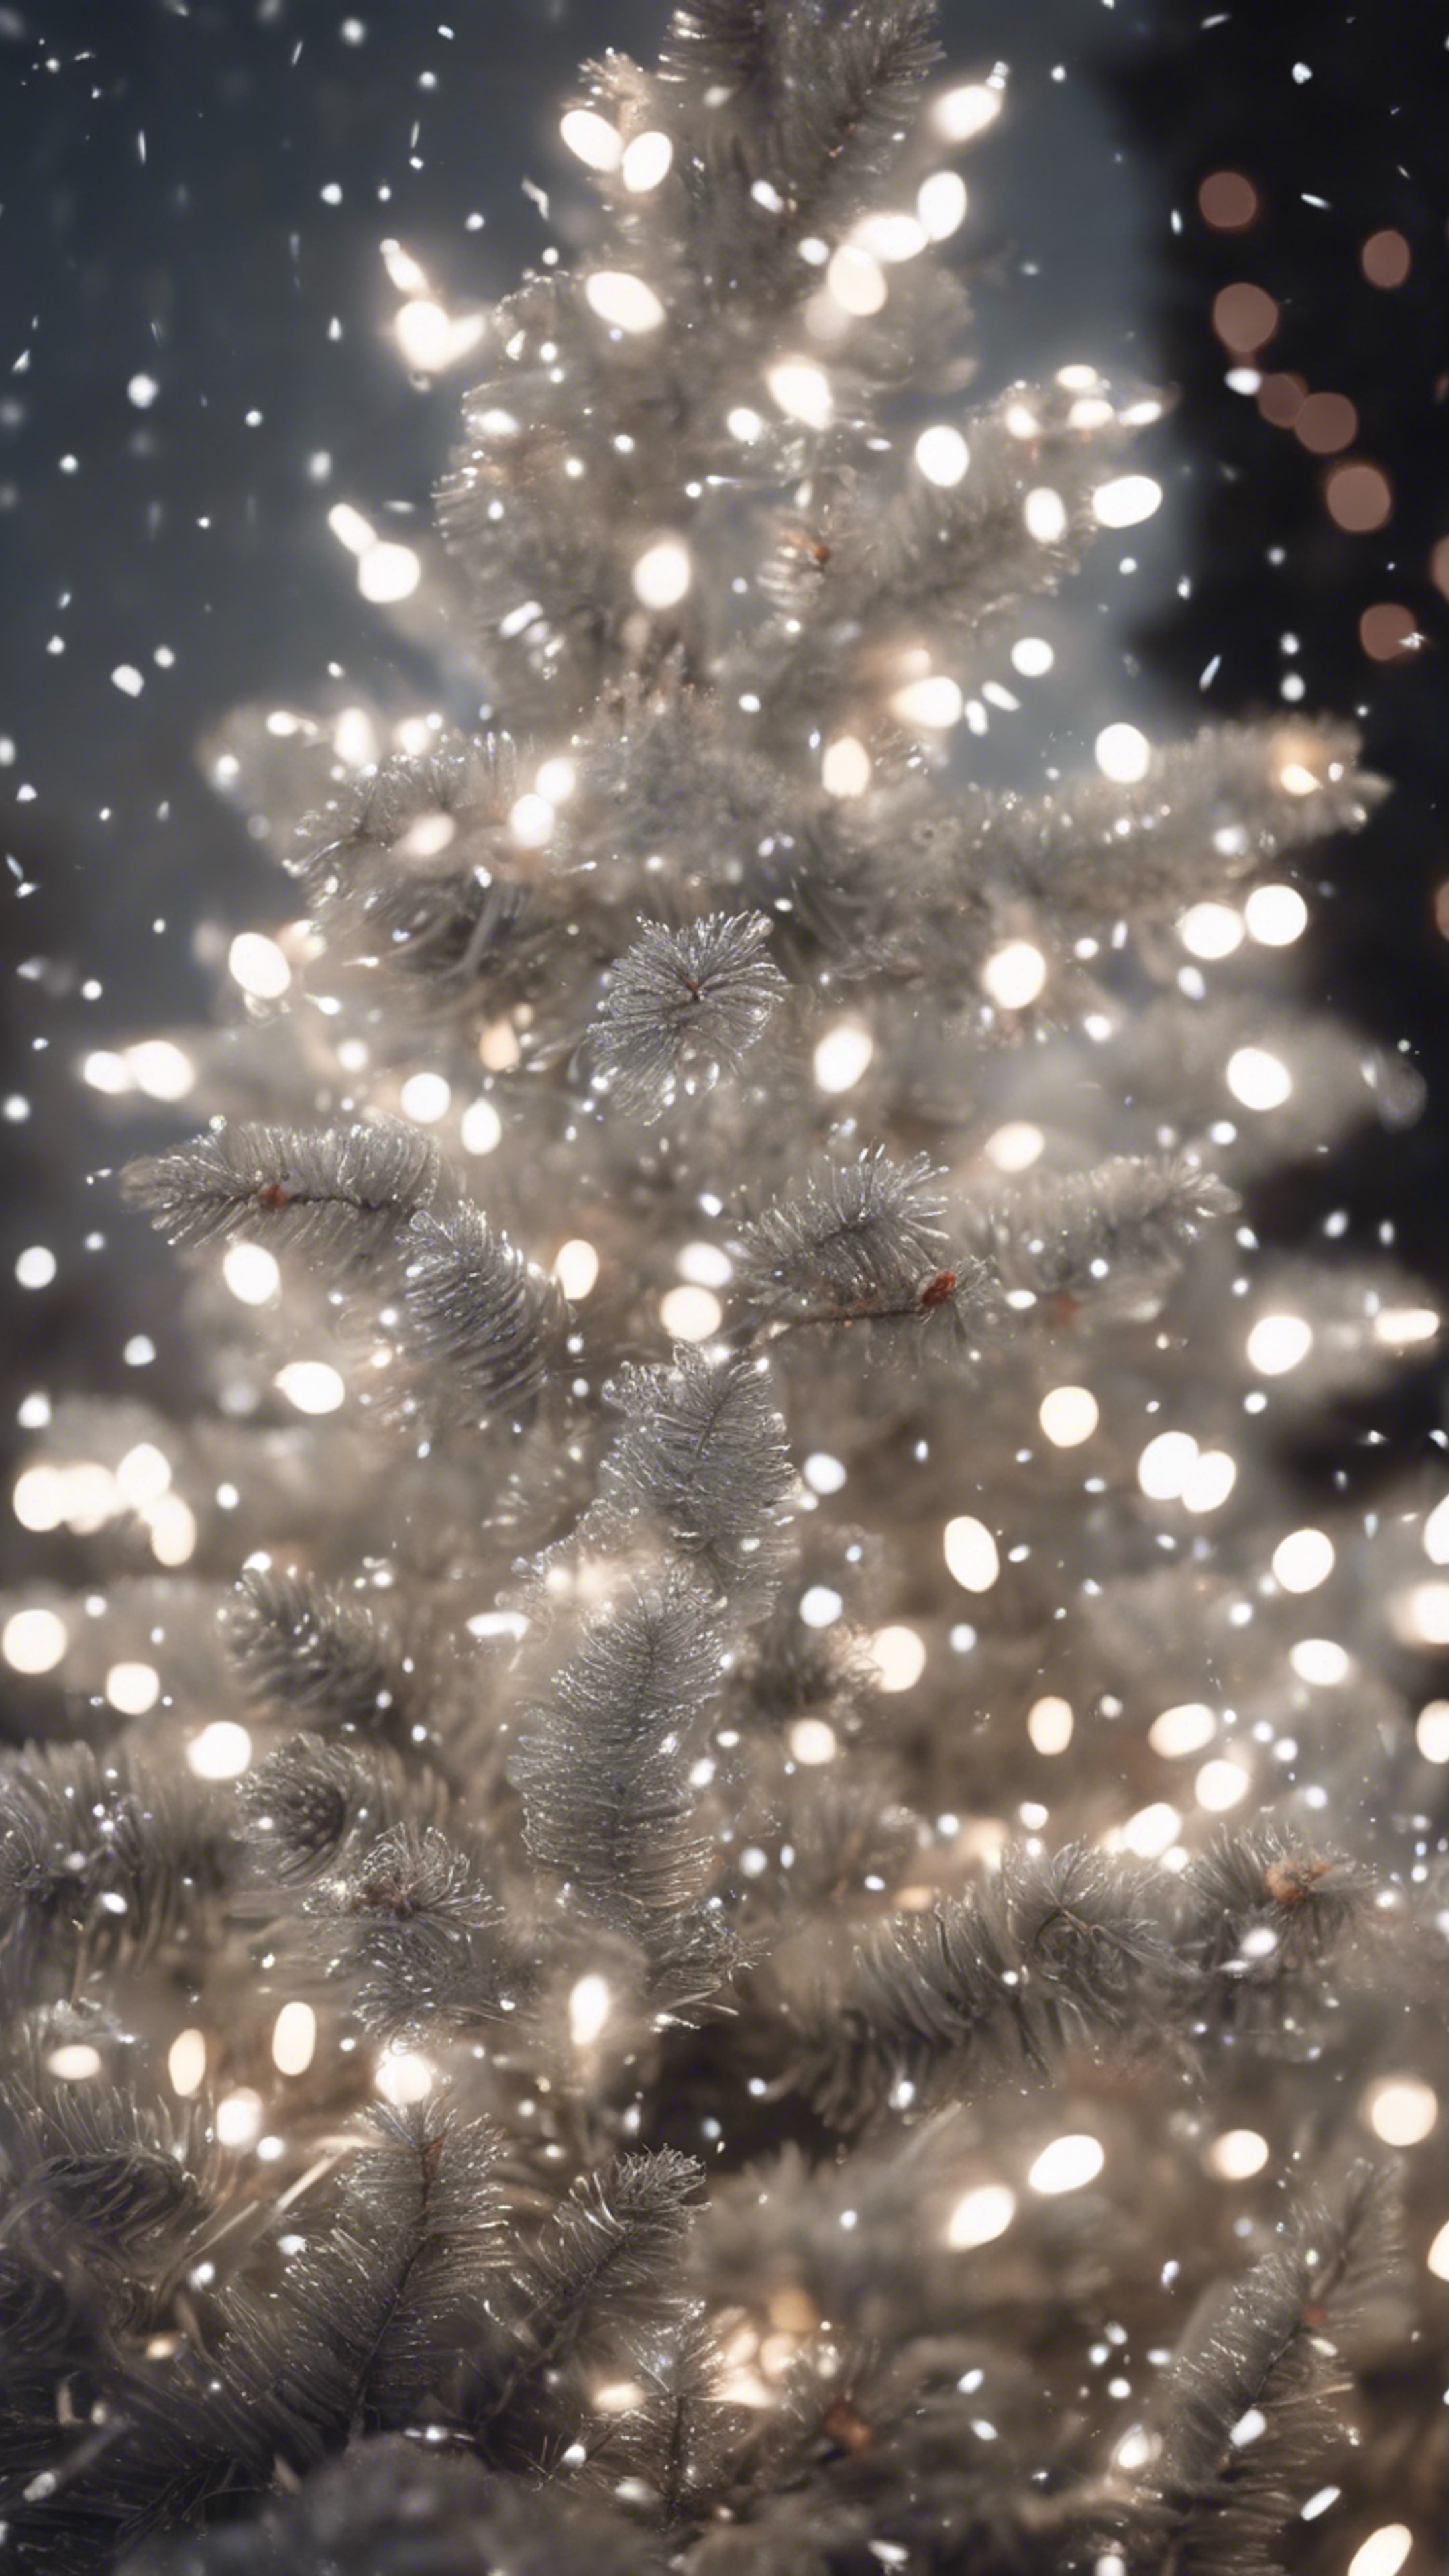 White Christmas lights shimmering on a silver spruce tree, with delicate snowflakes falling around. Tapéta[aebc3baa8421448a9f7c]